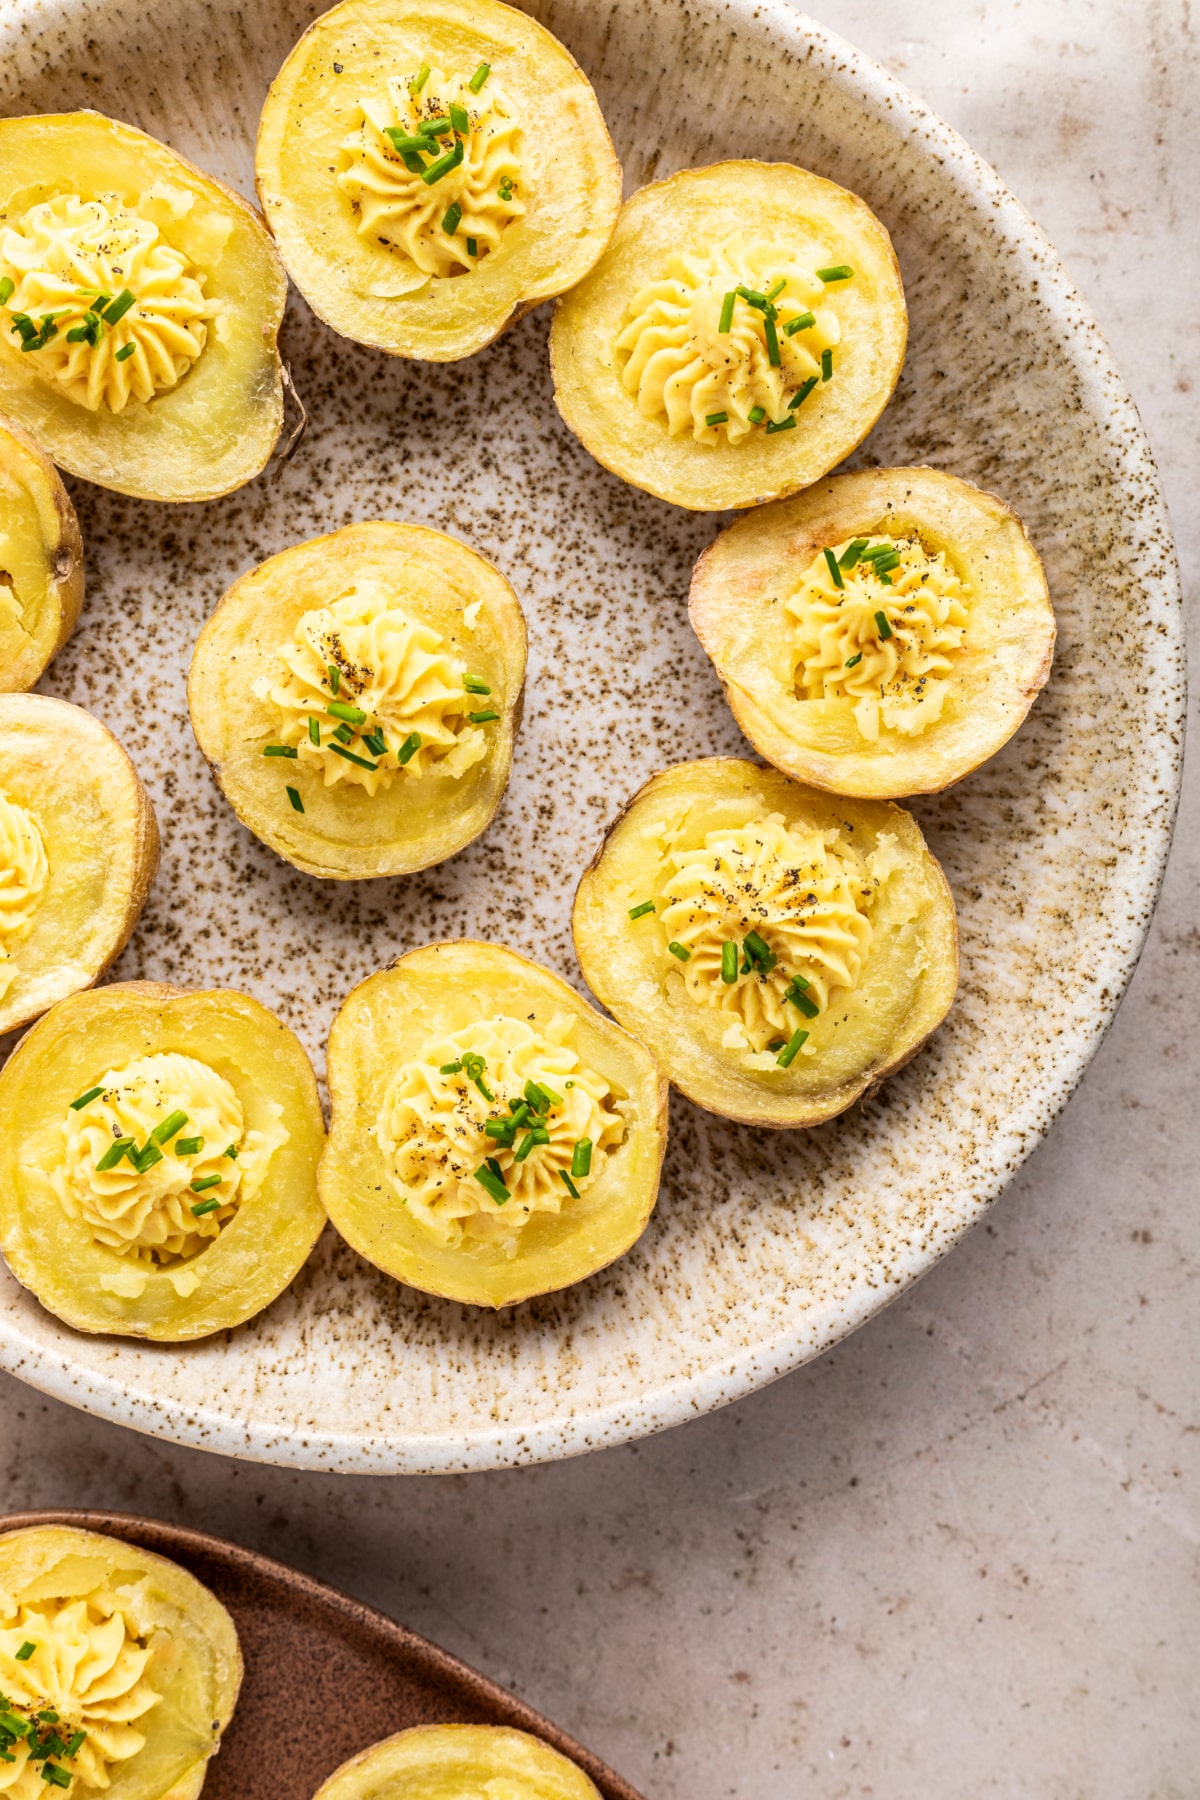 Overhead view of mini gold potatoes sliced in half, baked, scooped out and filled with a deviled egg flavored mixture. These deviled potatoes are sitting on a tan speckled dish for serving.